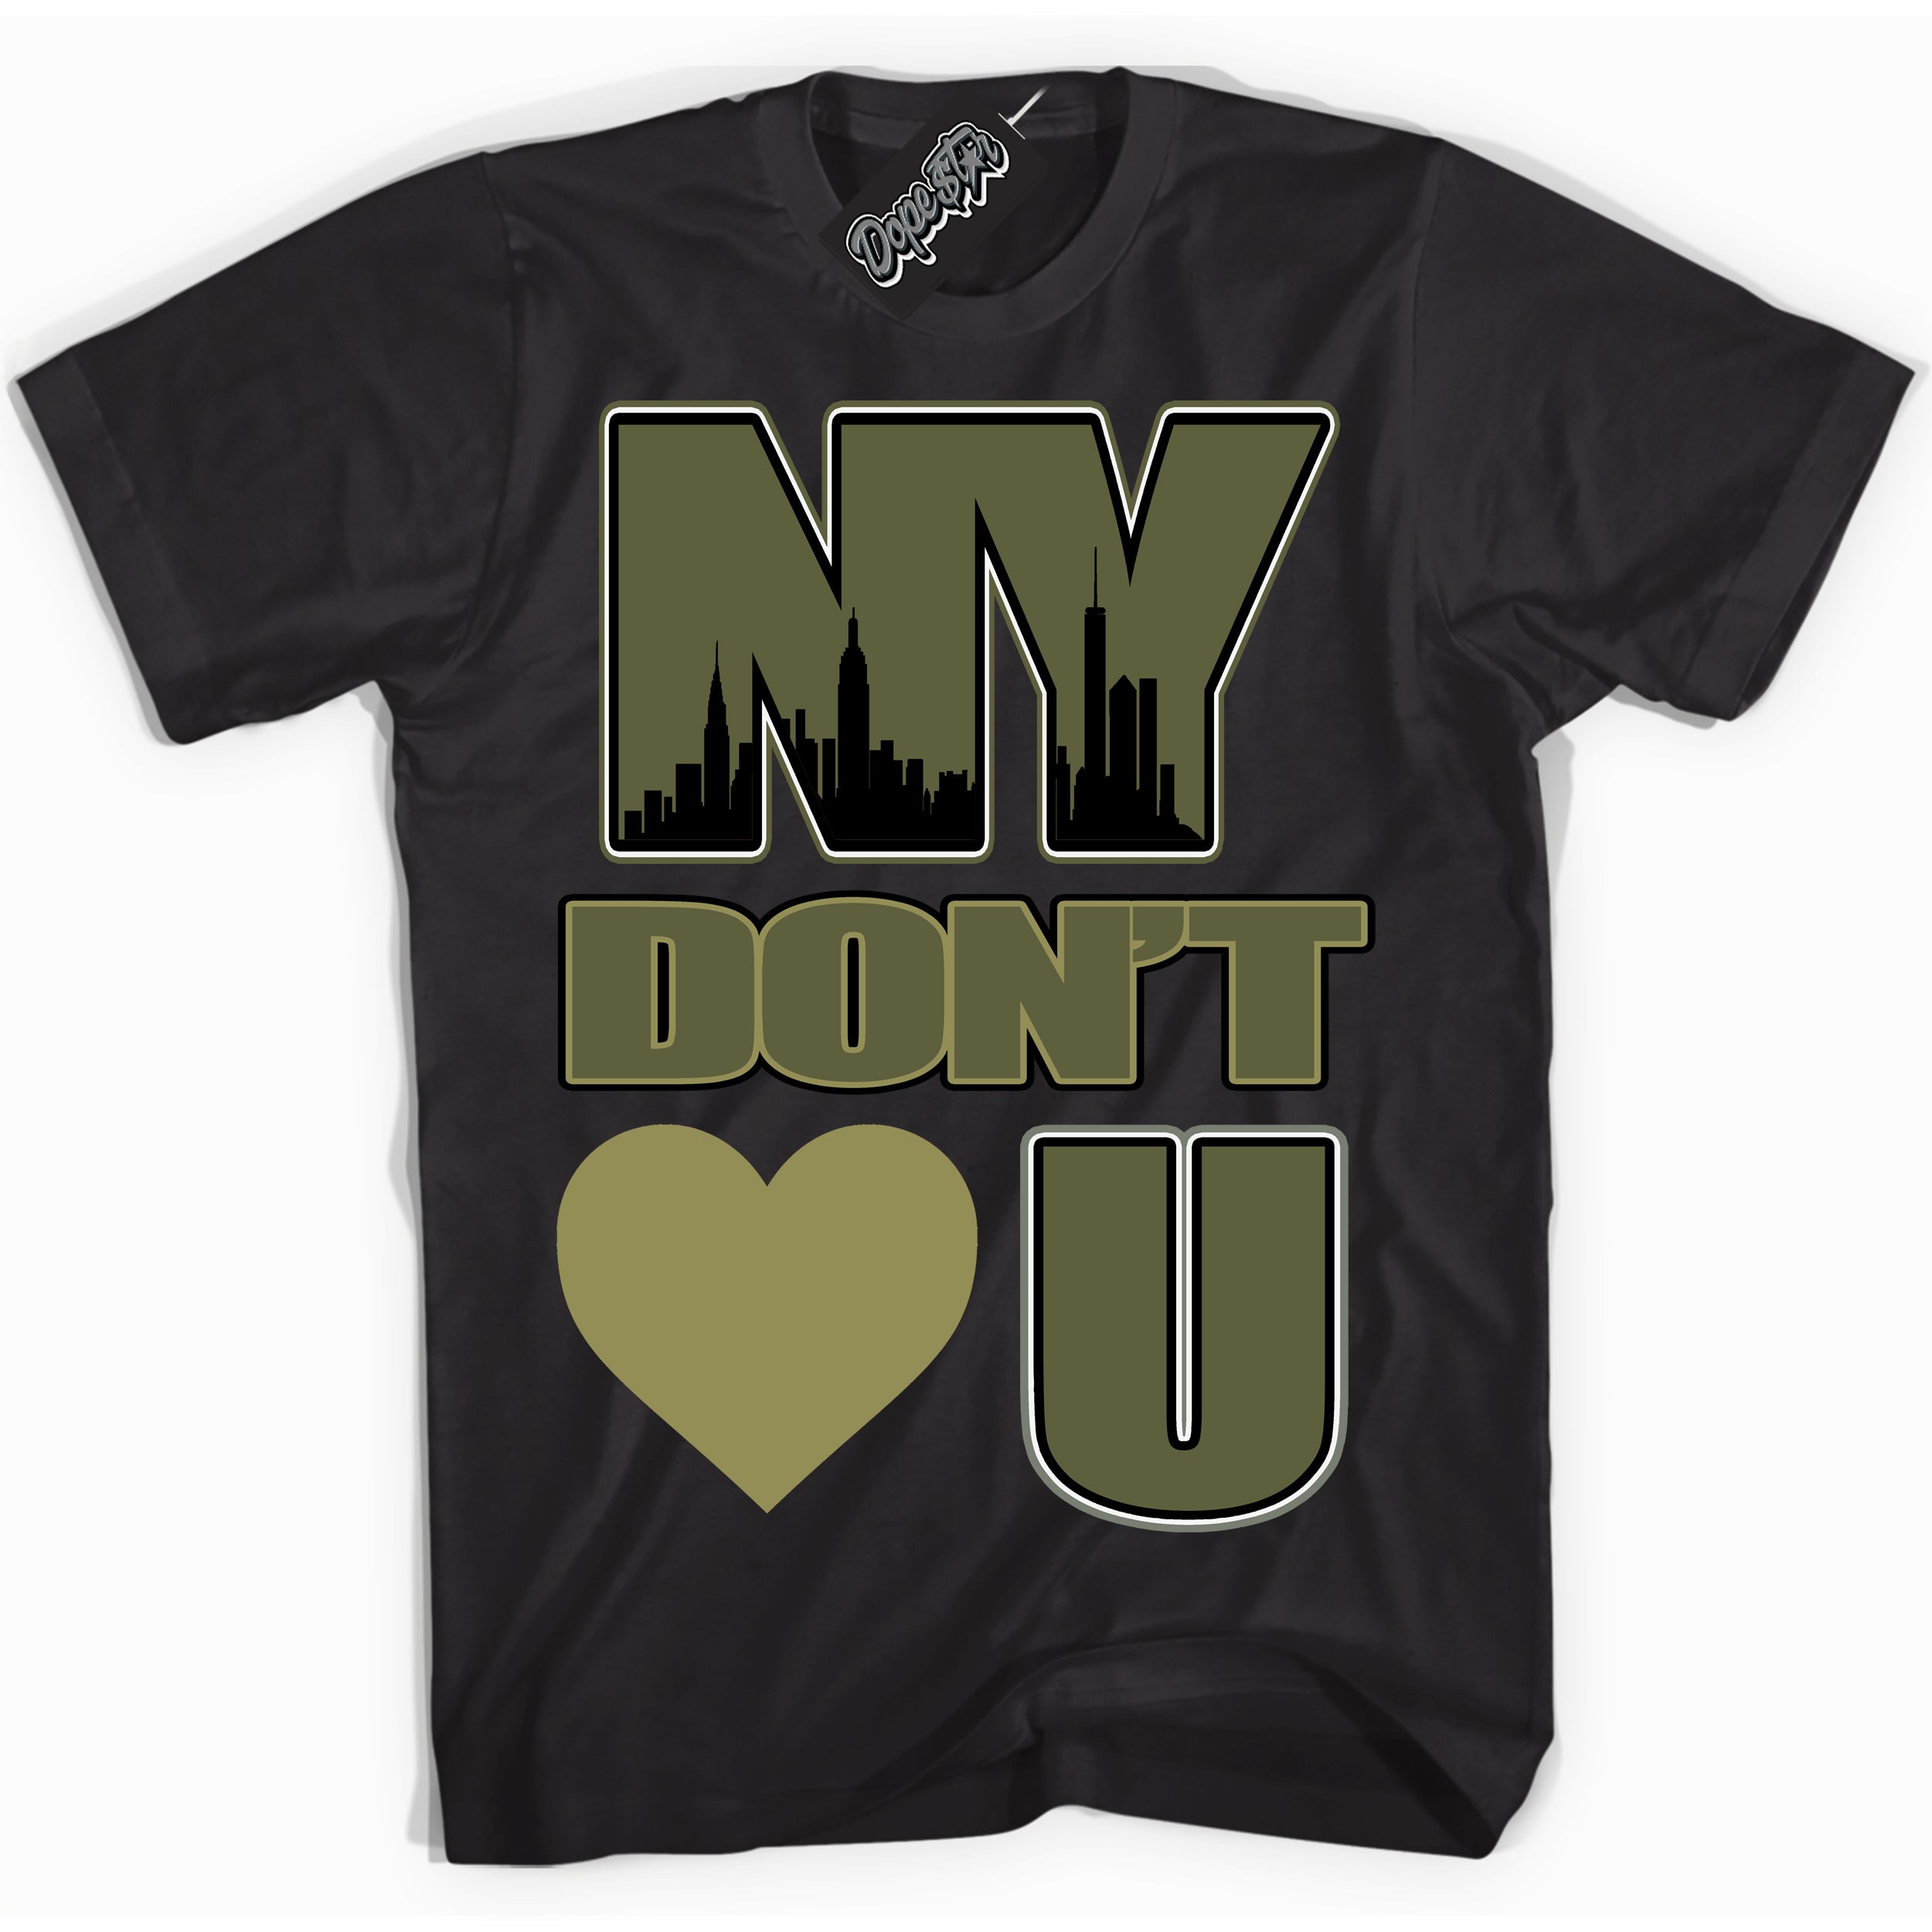 Cool Black graphic tee with “ NY Don’t Love U ” print, that perfectly matches Craft Olive 4s sneakers